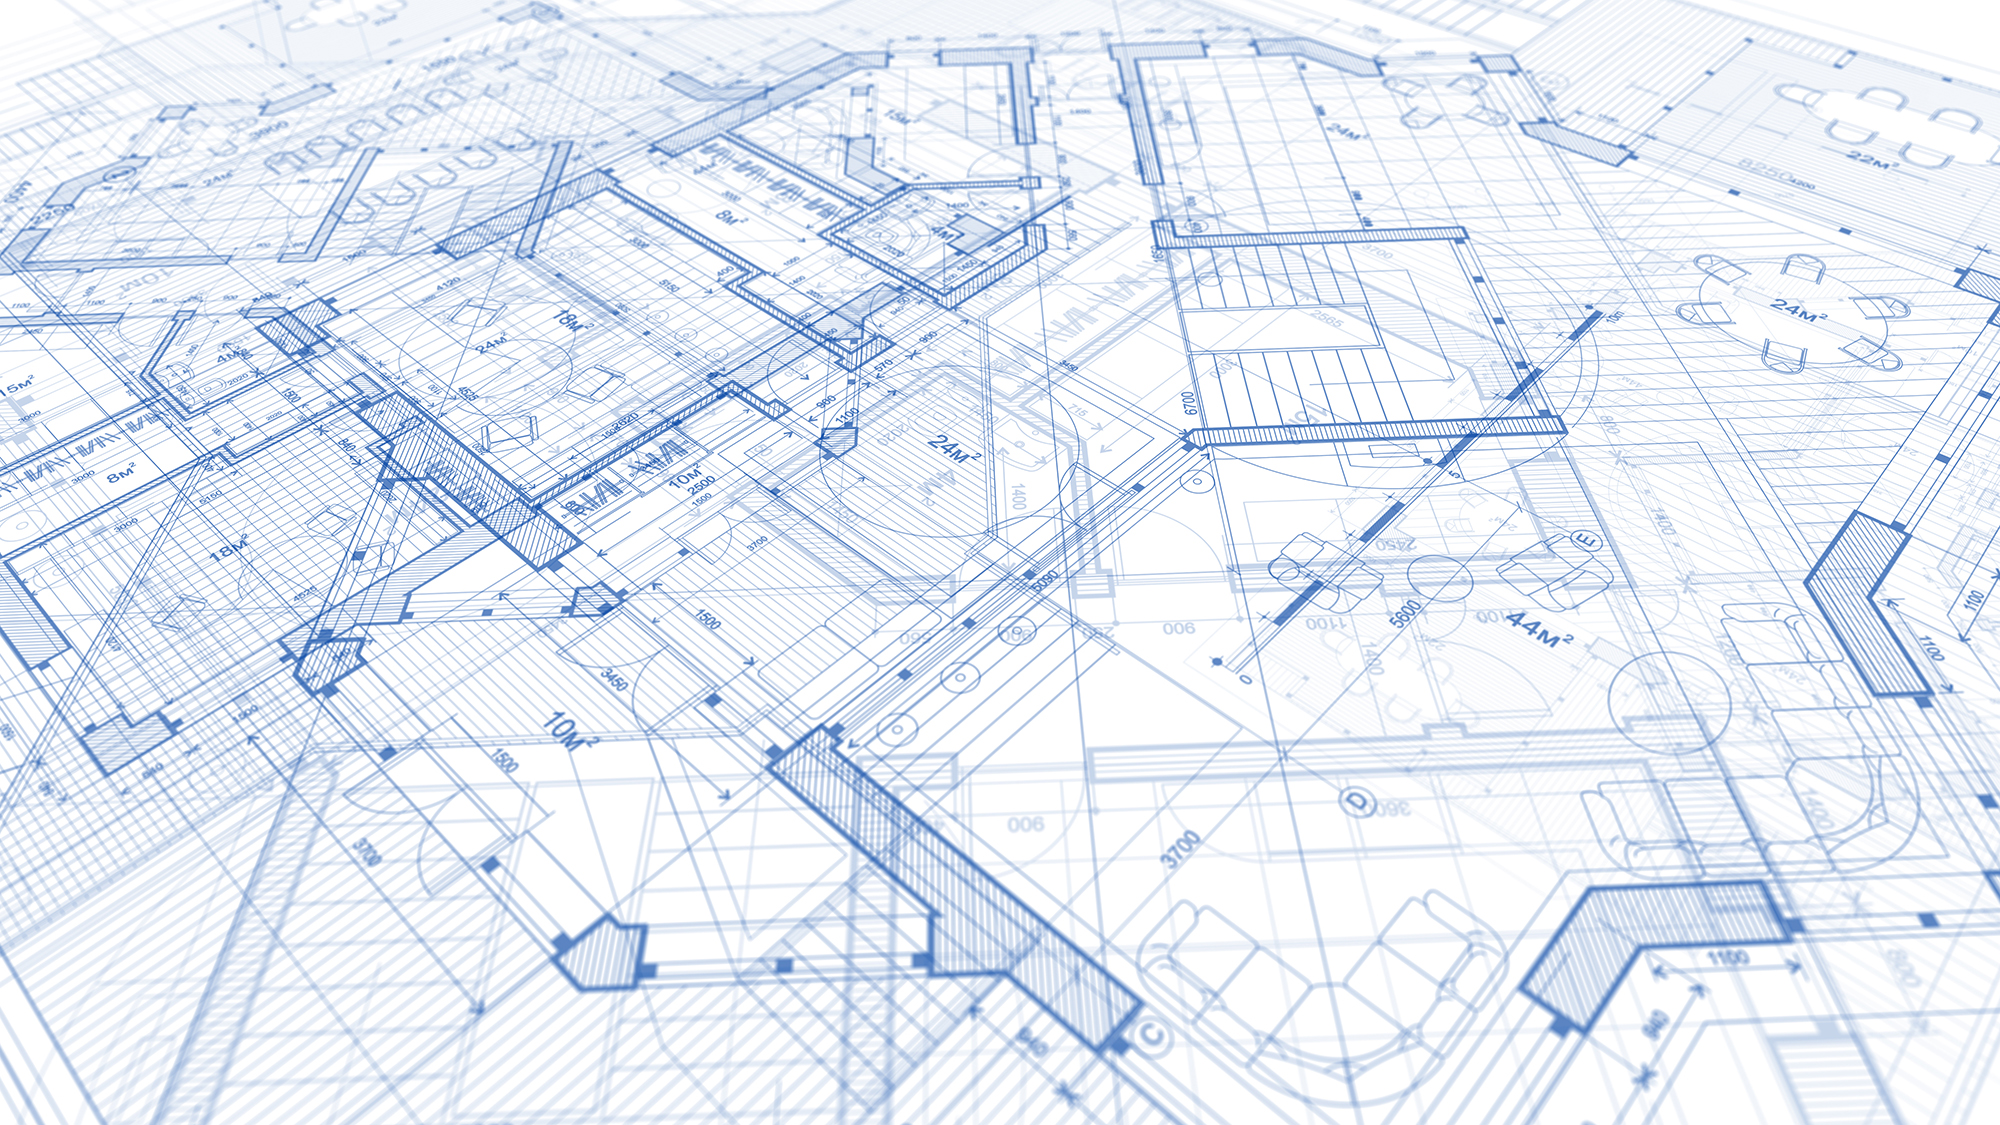 Architectural drawings and plans for planning permission when you're working with us